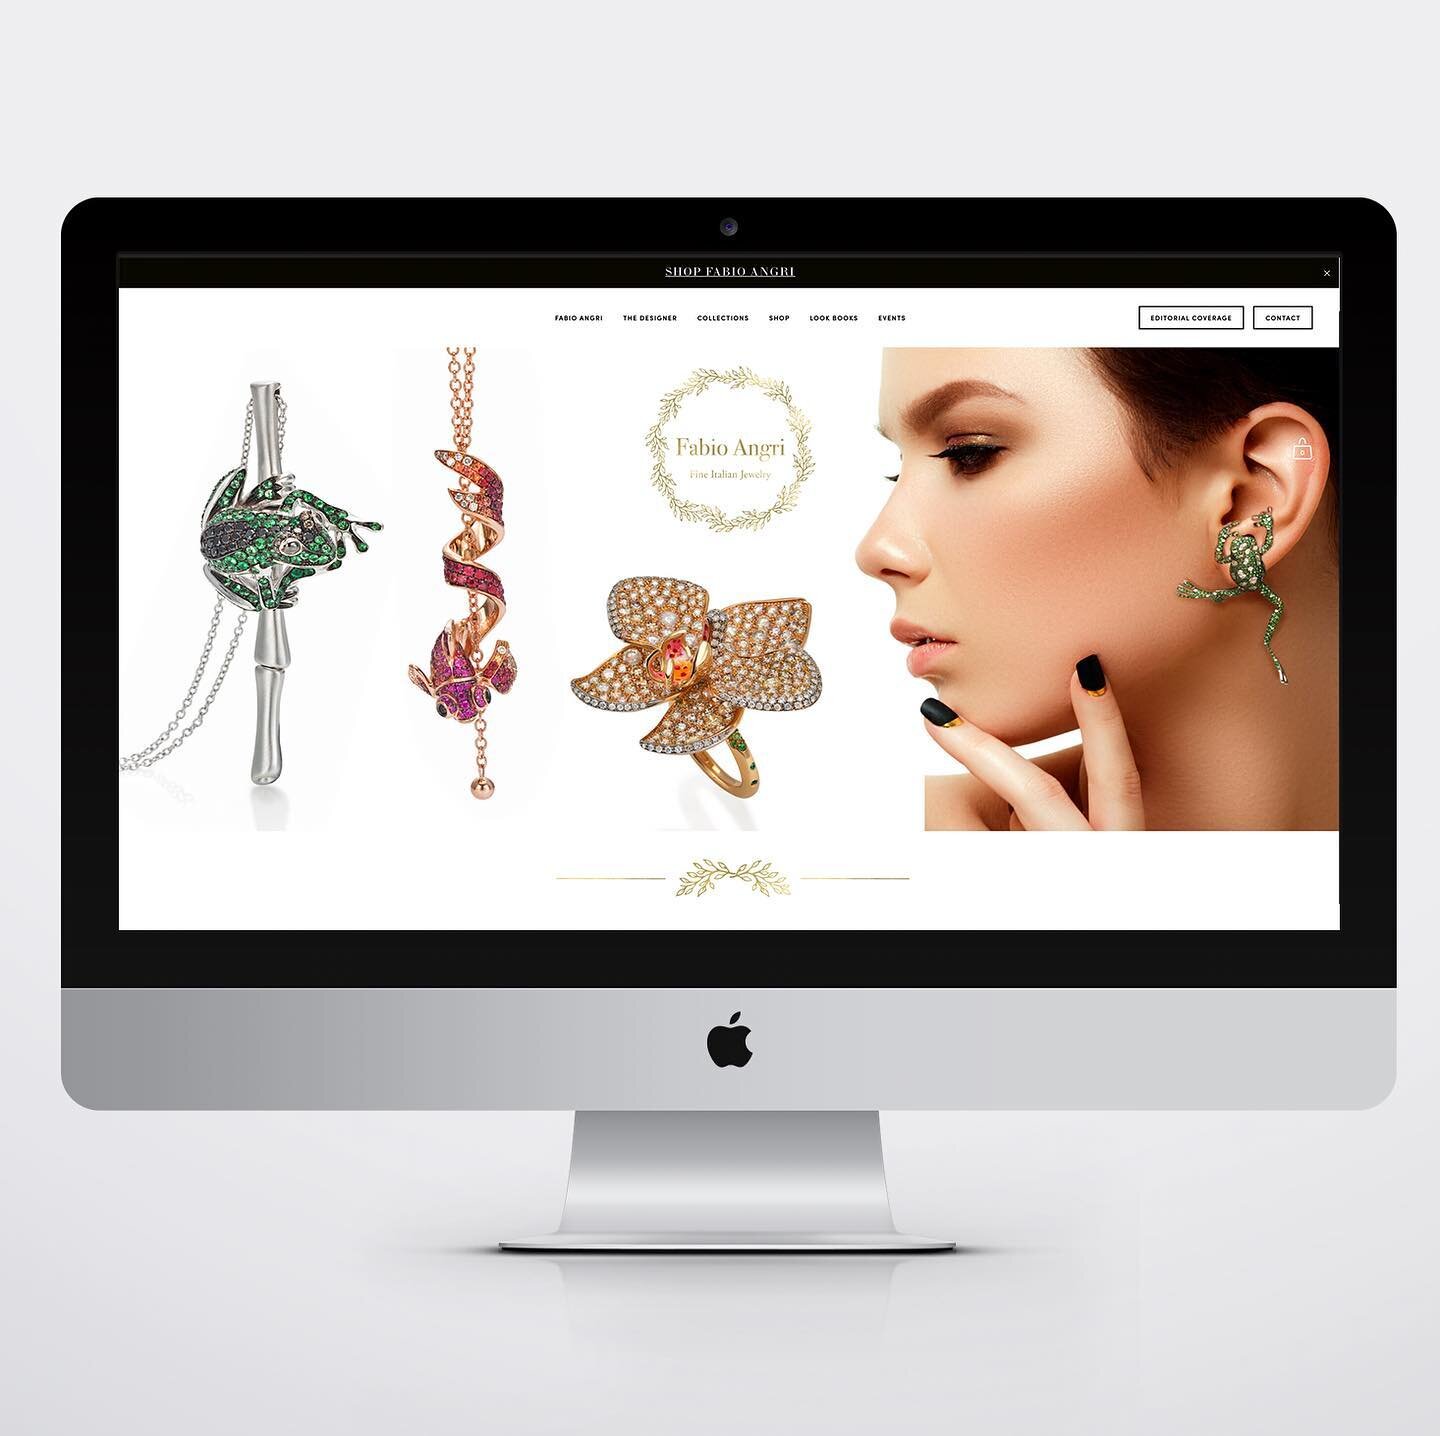 Website design created for the Fabio Angri brand. Letting the gorgeous jewellery speak for itself. 

Teaming with @kennedywoodmarketing on this amazing project. 

#logos #branding #design #njfoodtrucksrus #westfieldnj #digitaldesign #creativedesign #